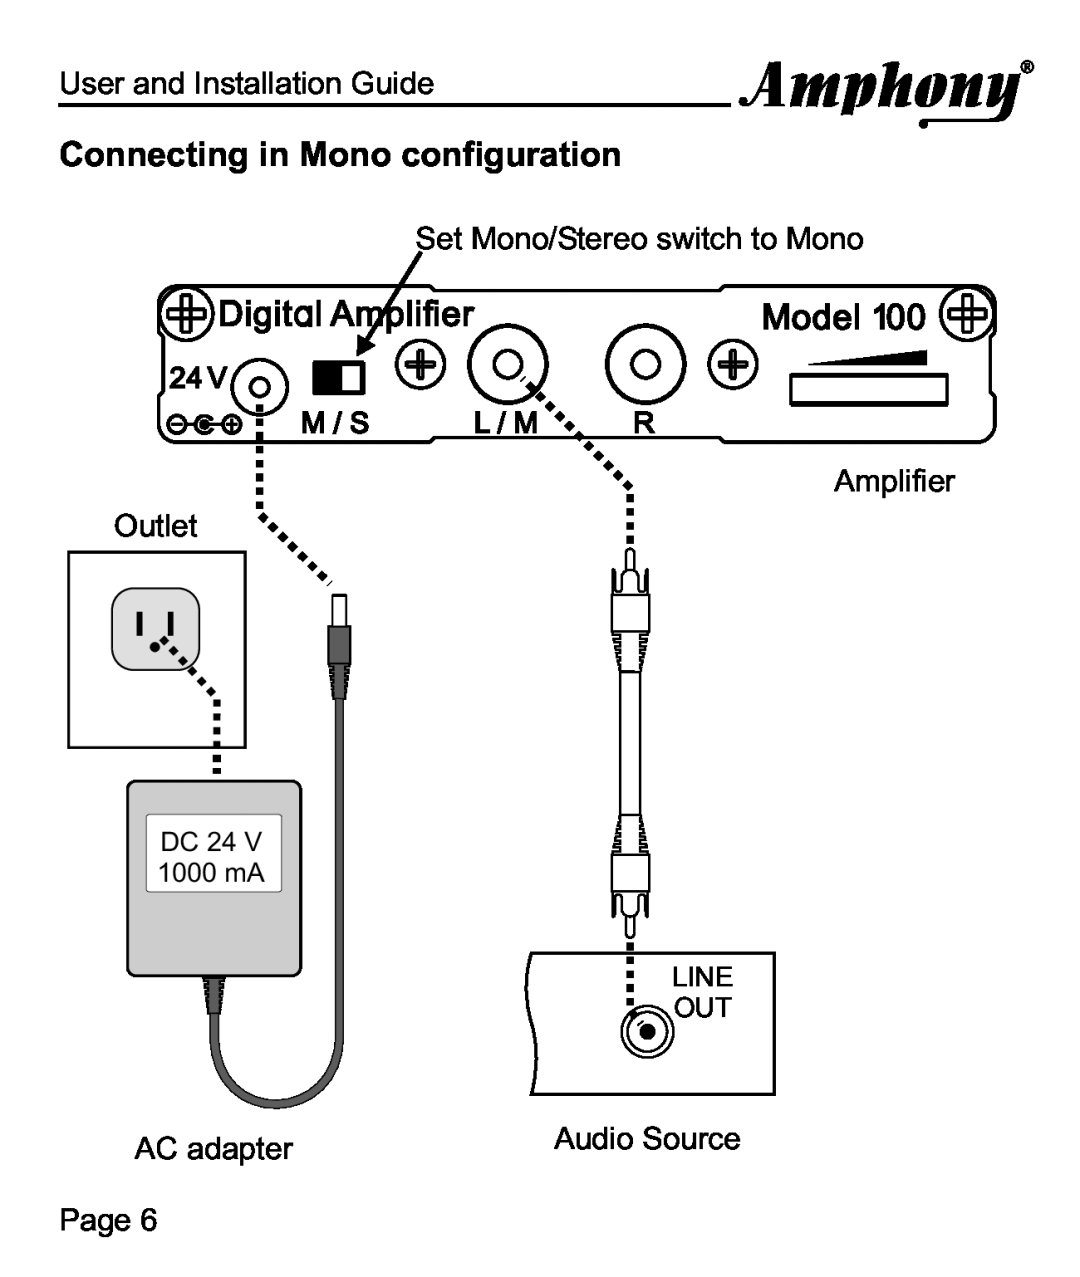 Amphony 100 Connecting in Mono configuration, Digita l Amplifier, Model, User and Installation Guide, Amplifier Outlet 